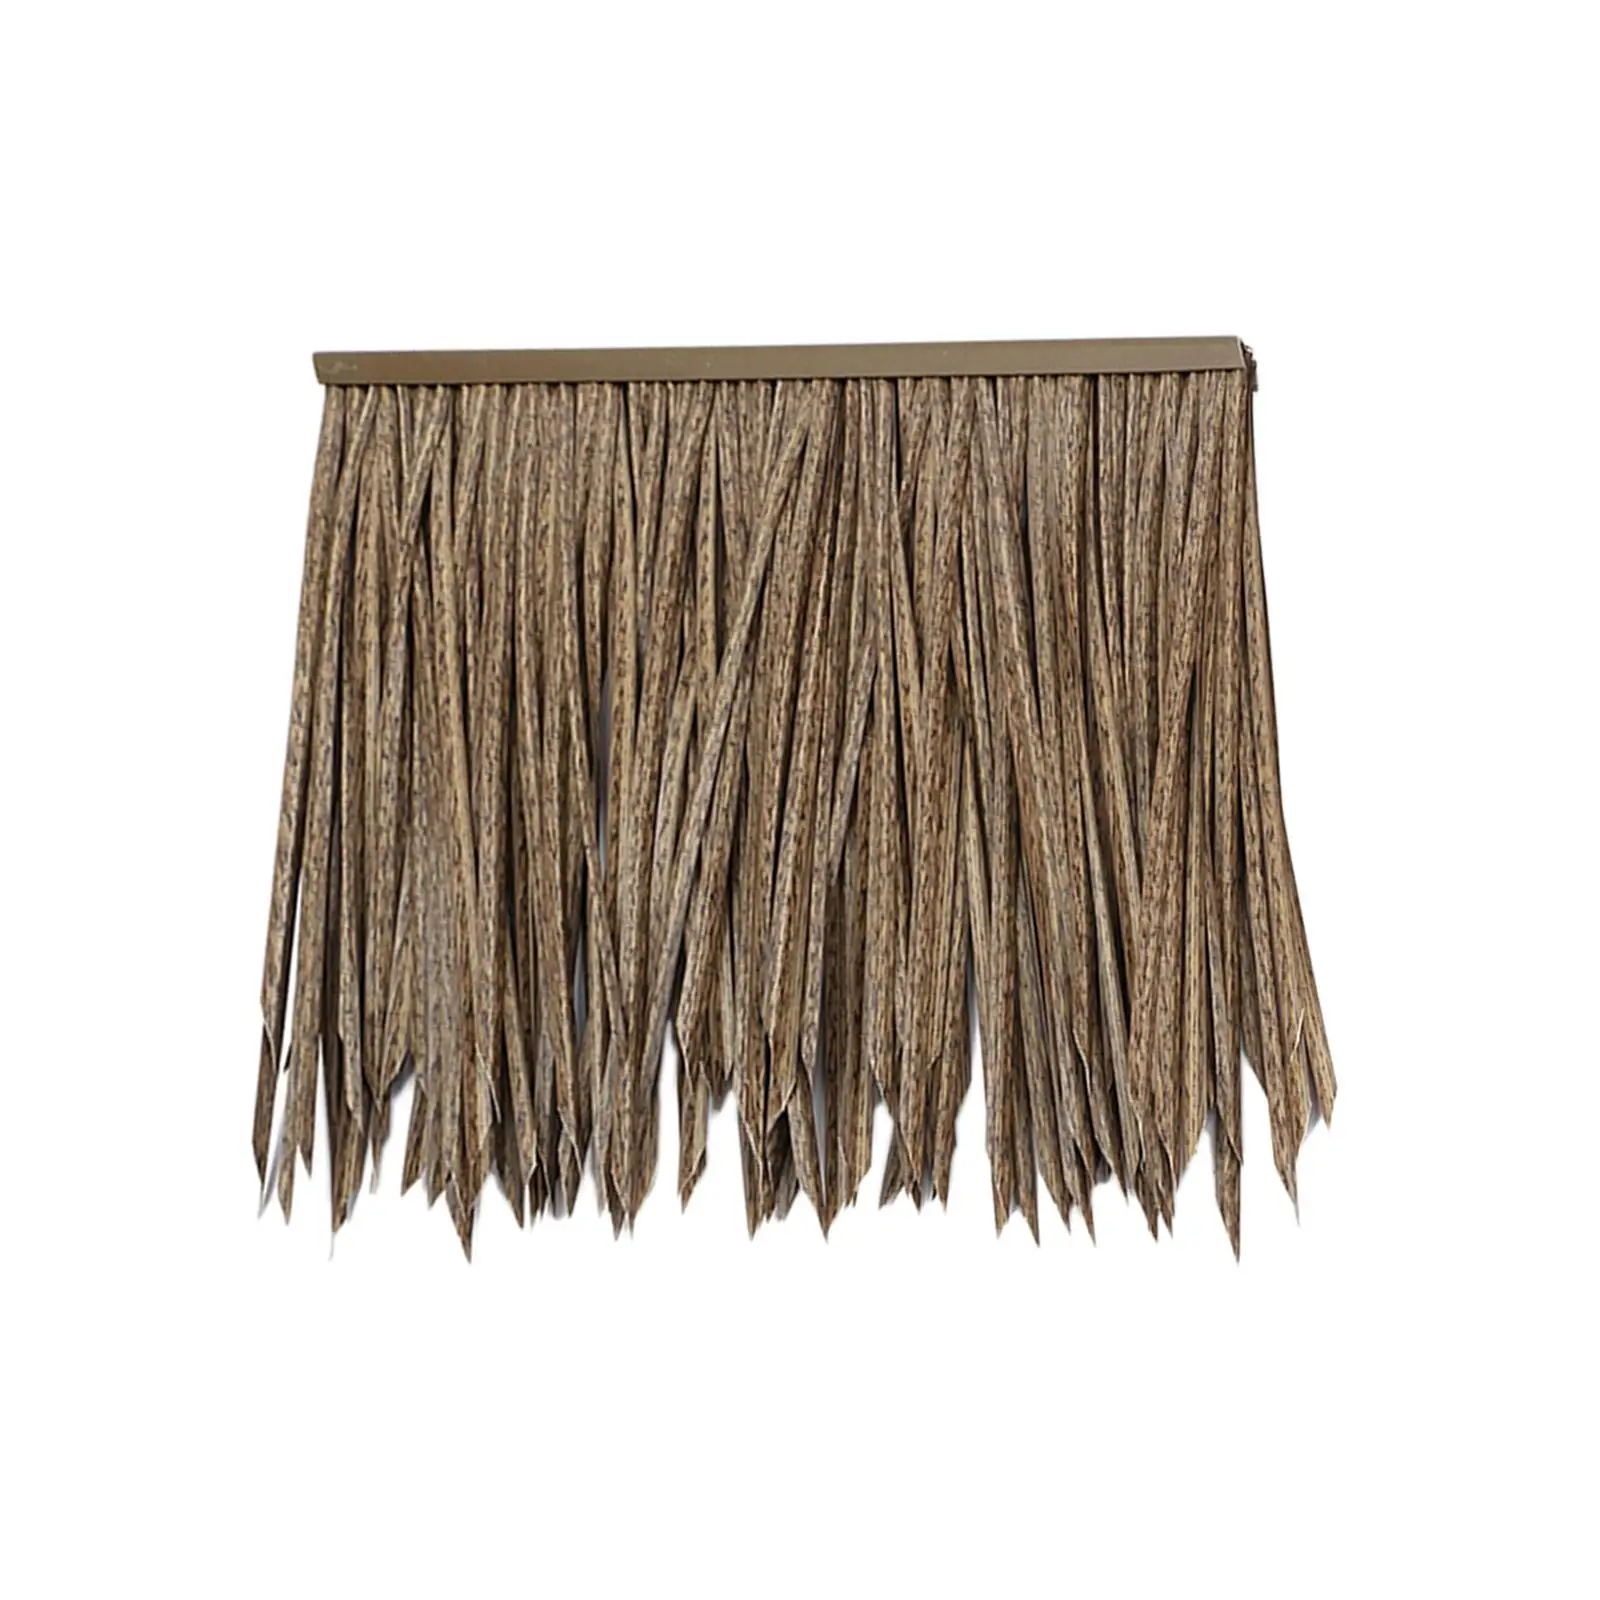 Straw Roof Thatch Devices Ceiling Easy to Use Centerpiece Multifunction Panel Palm Thatch Roll for Garden Pavilion Bar House Hut